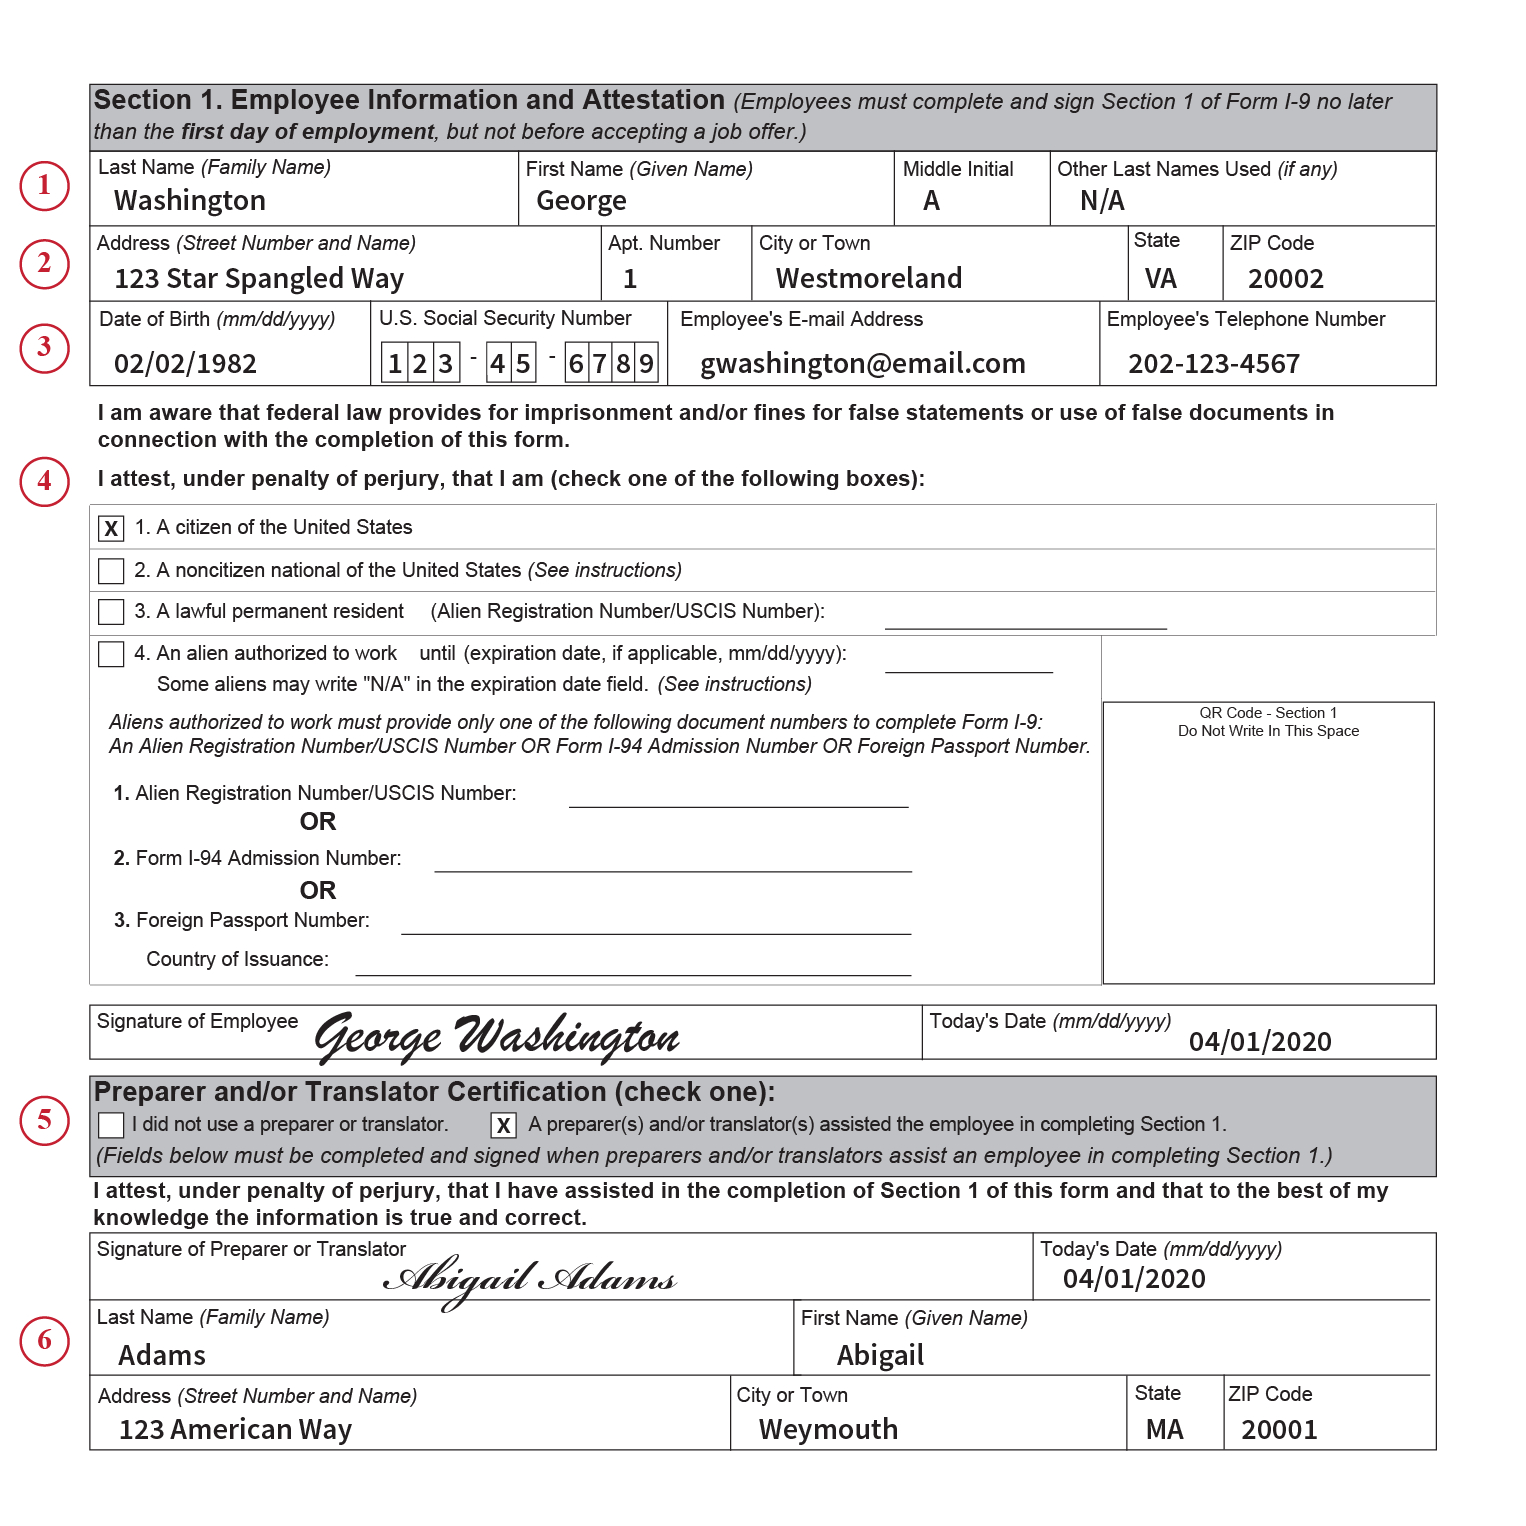 What Is Form I-9 And How To Stay Compliant With I-9? regarding I9 Form From USCIS